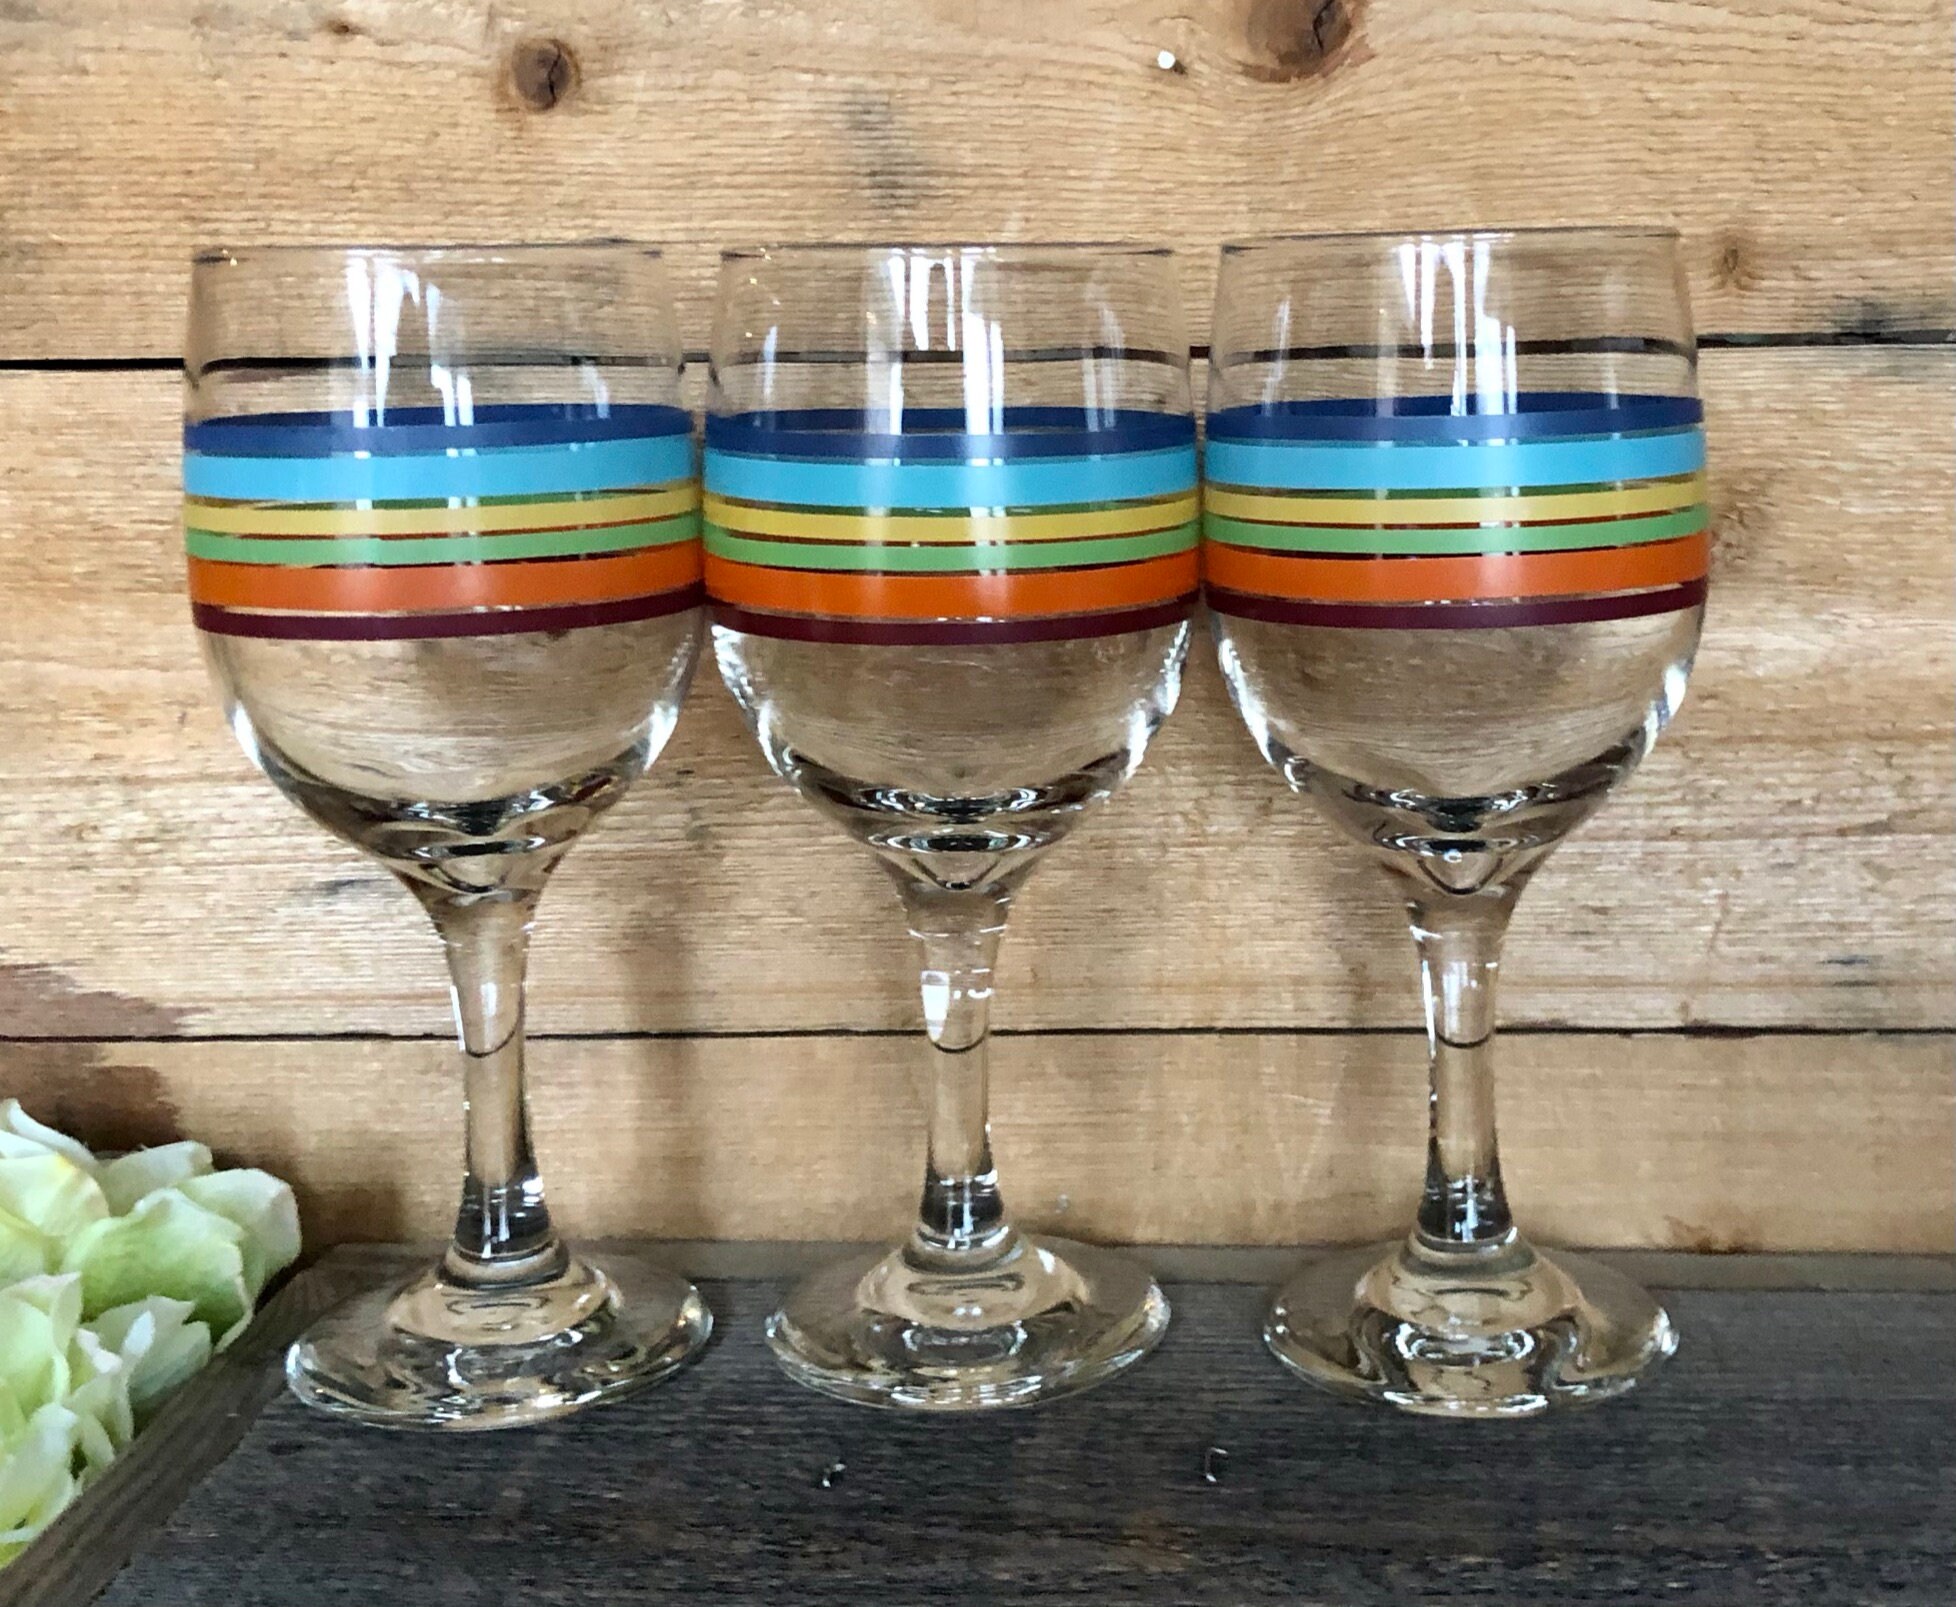 Striped Stem Balloon Wine Glass Collection of Seven